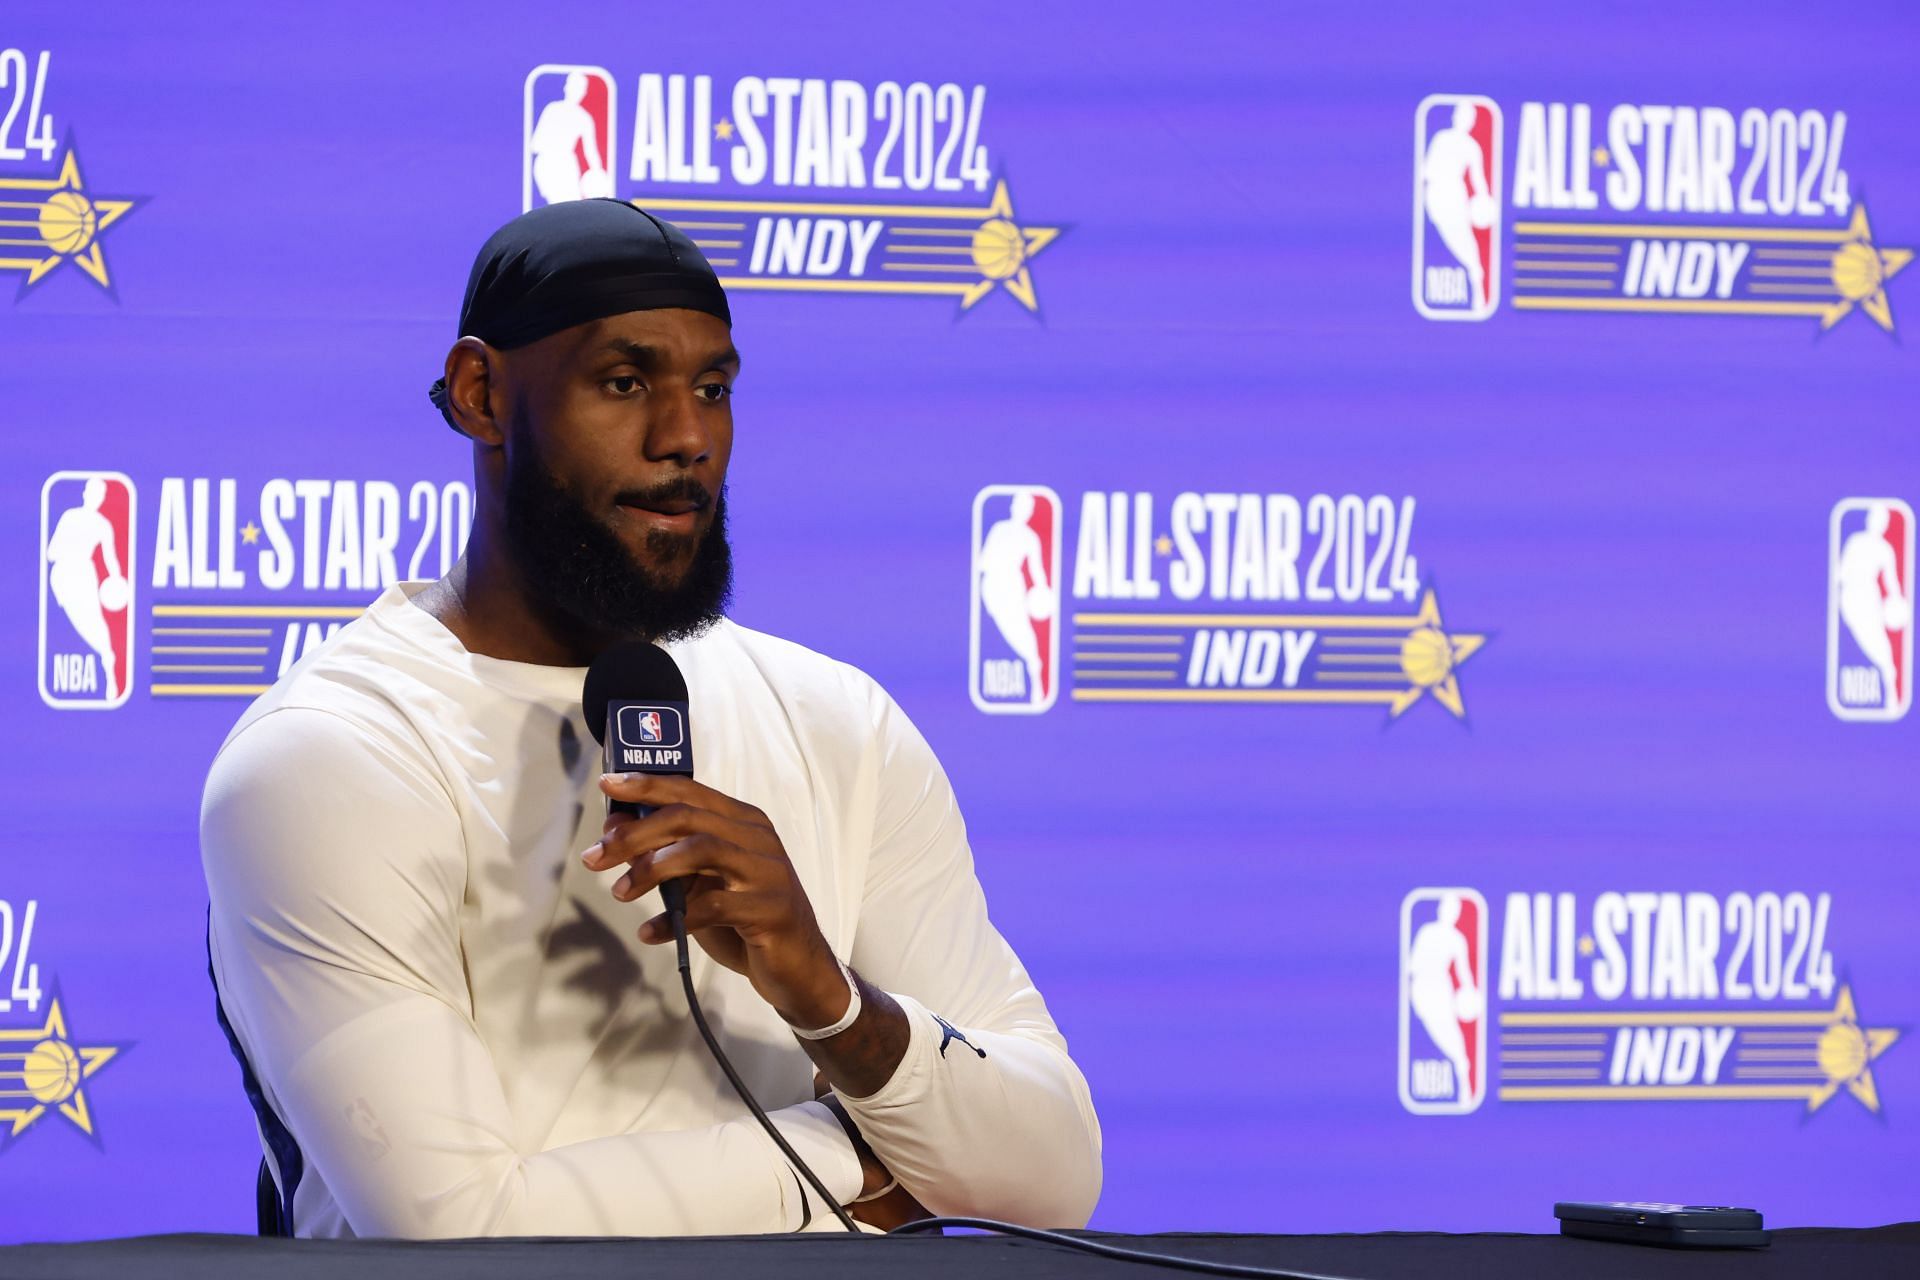 LeBron James not interested in farewell tour